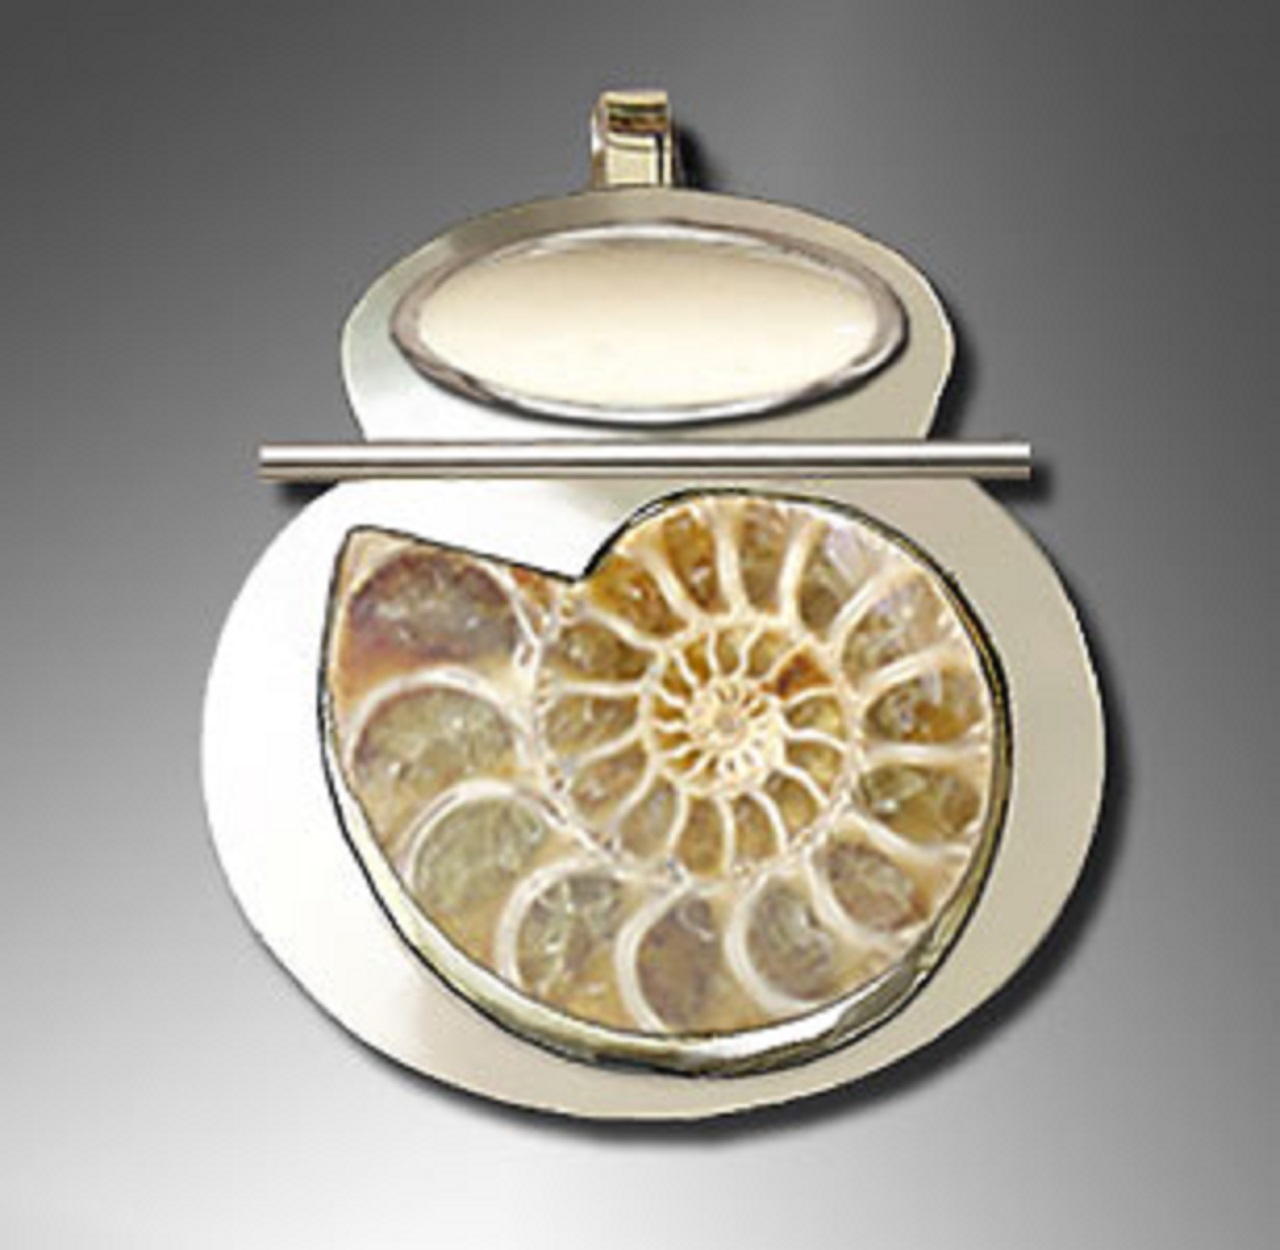 A number-eight-shaped fossil pendant in silver with white onyx and ammonite